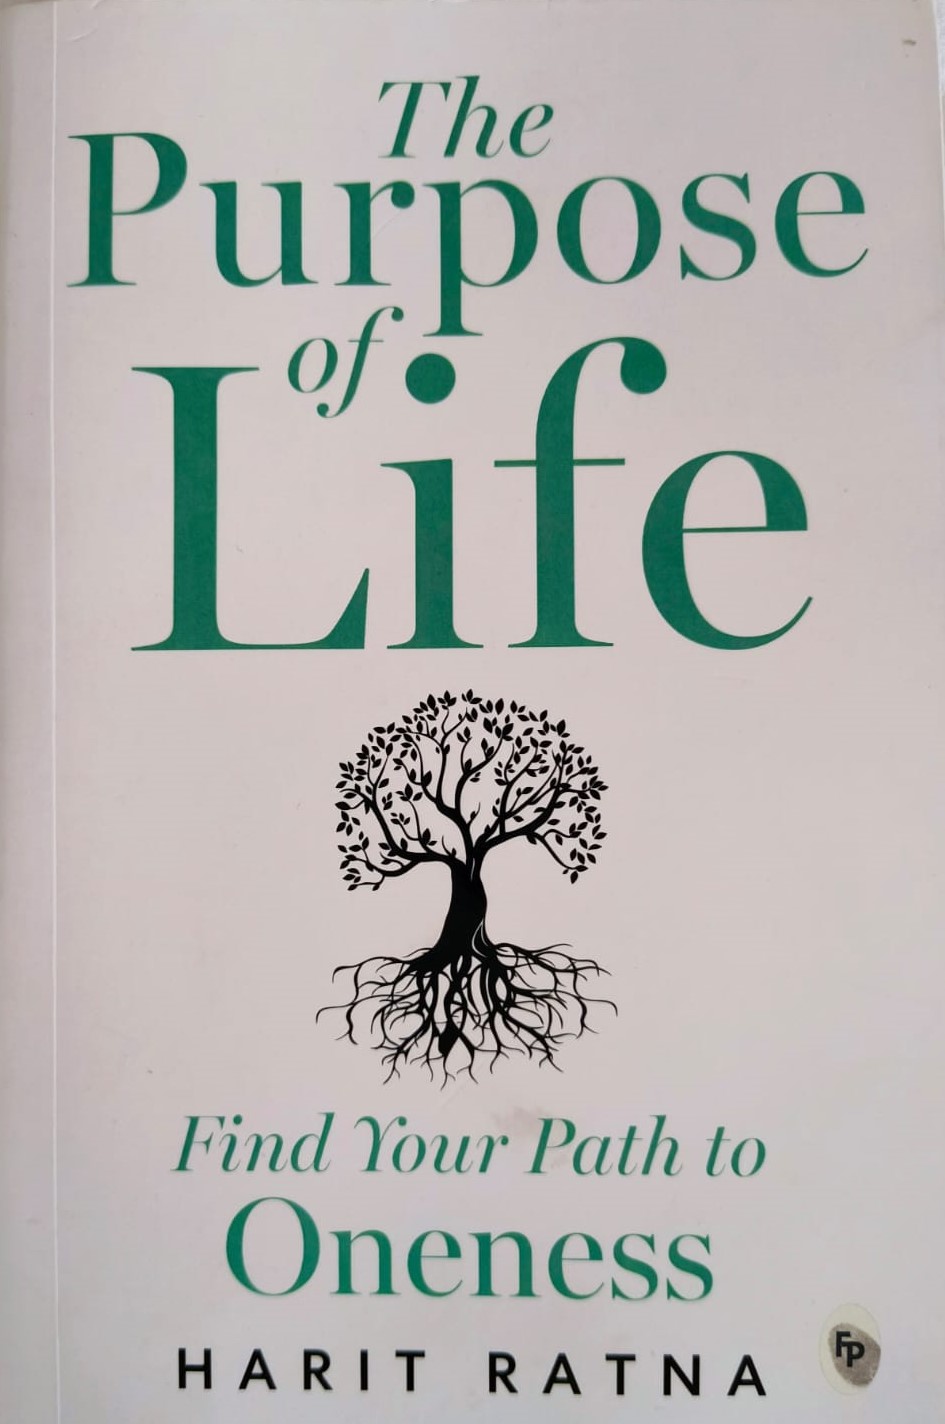 The Purpose of Life by Harit Ratna